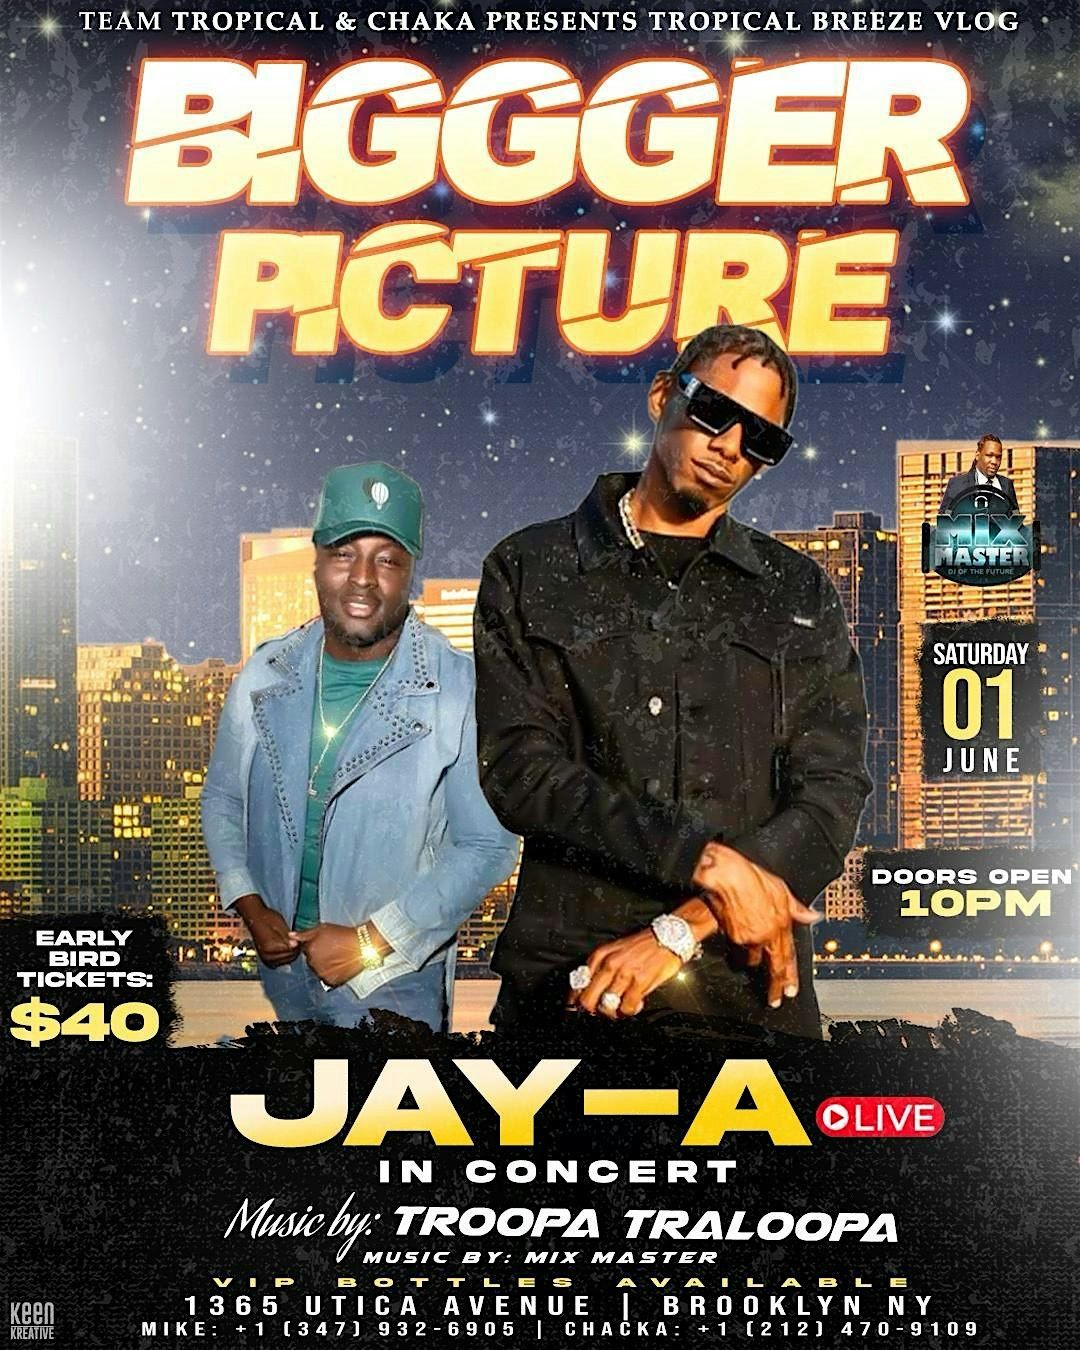 JAY-A LIVE IN CONCERT PRESENTED BY TEAM TROPICAL & CHAKA